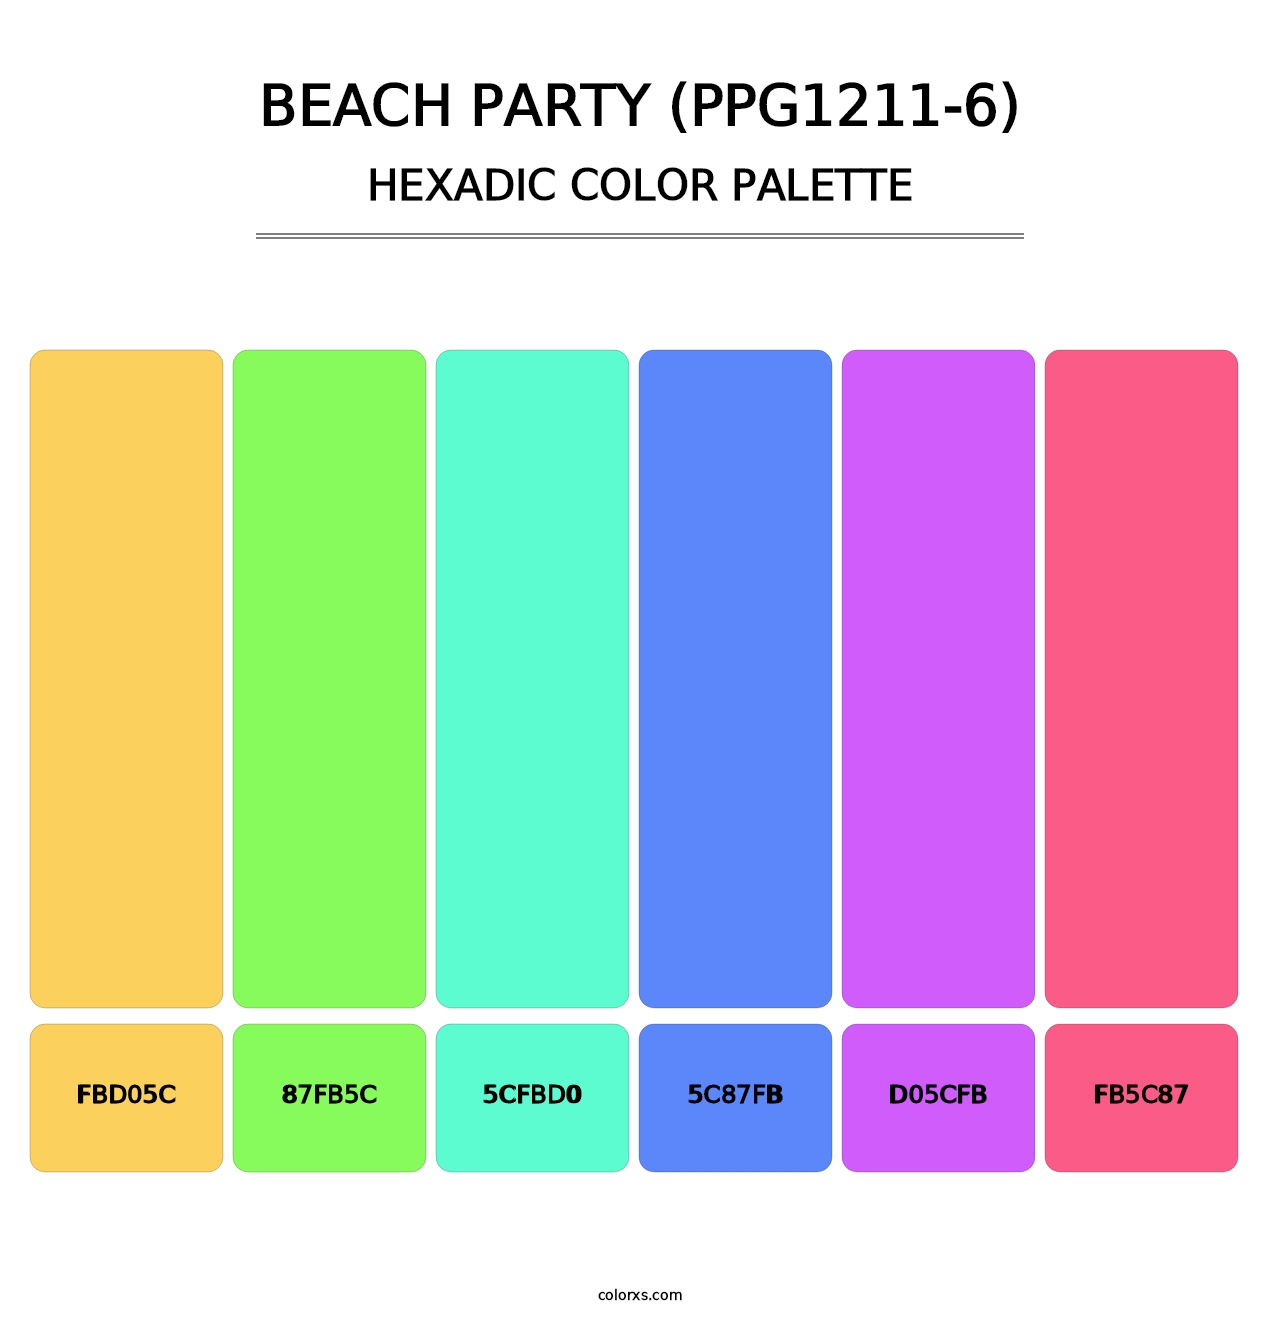 Beach Party (PPG1211-6) - Hexadic Color Palette